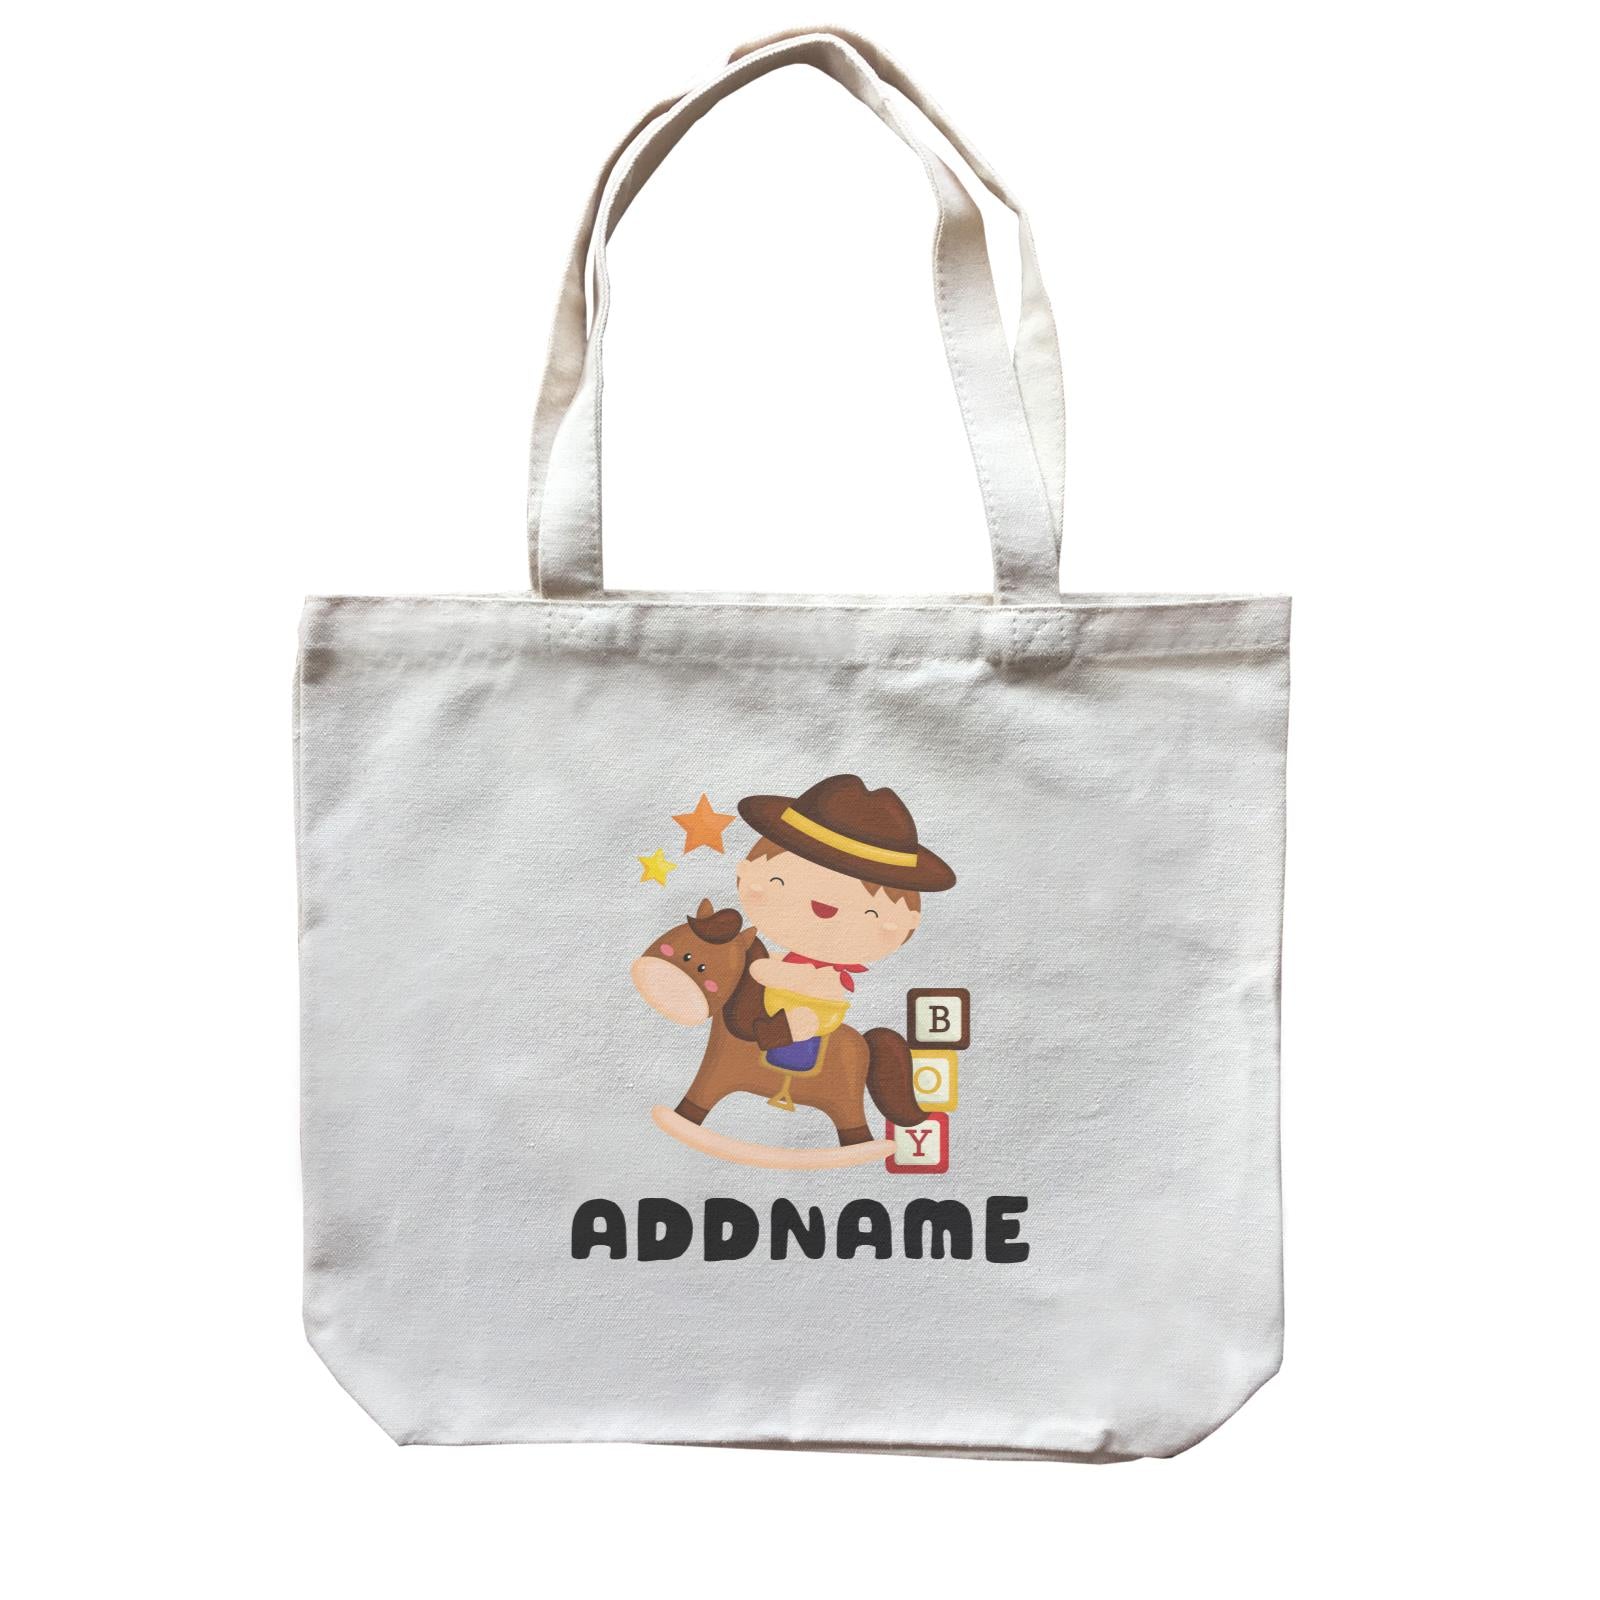 Birthday Cowboy Style Little Cowboy Holding Hoe In Star Badge Addname Canvas Bag